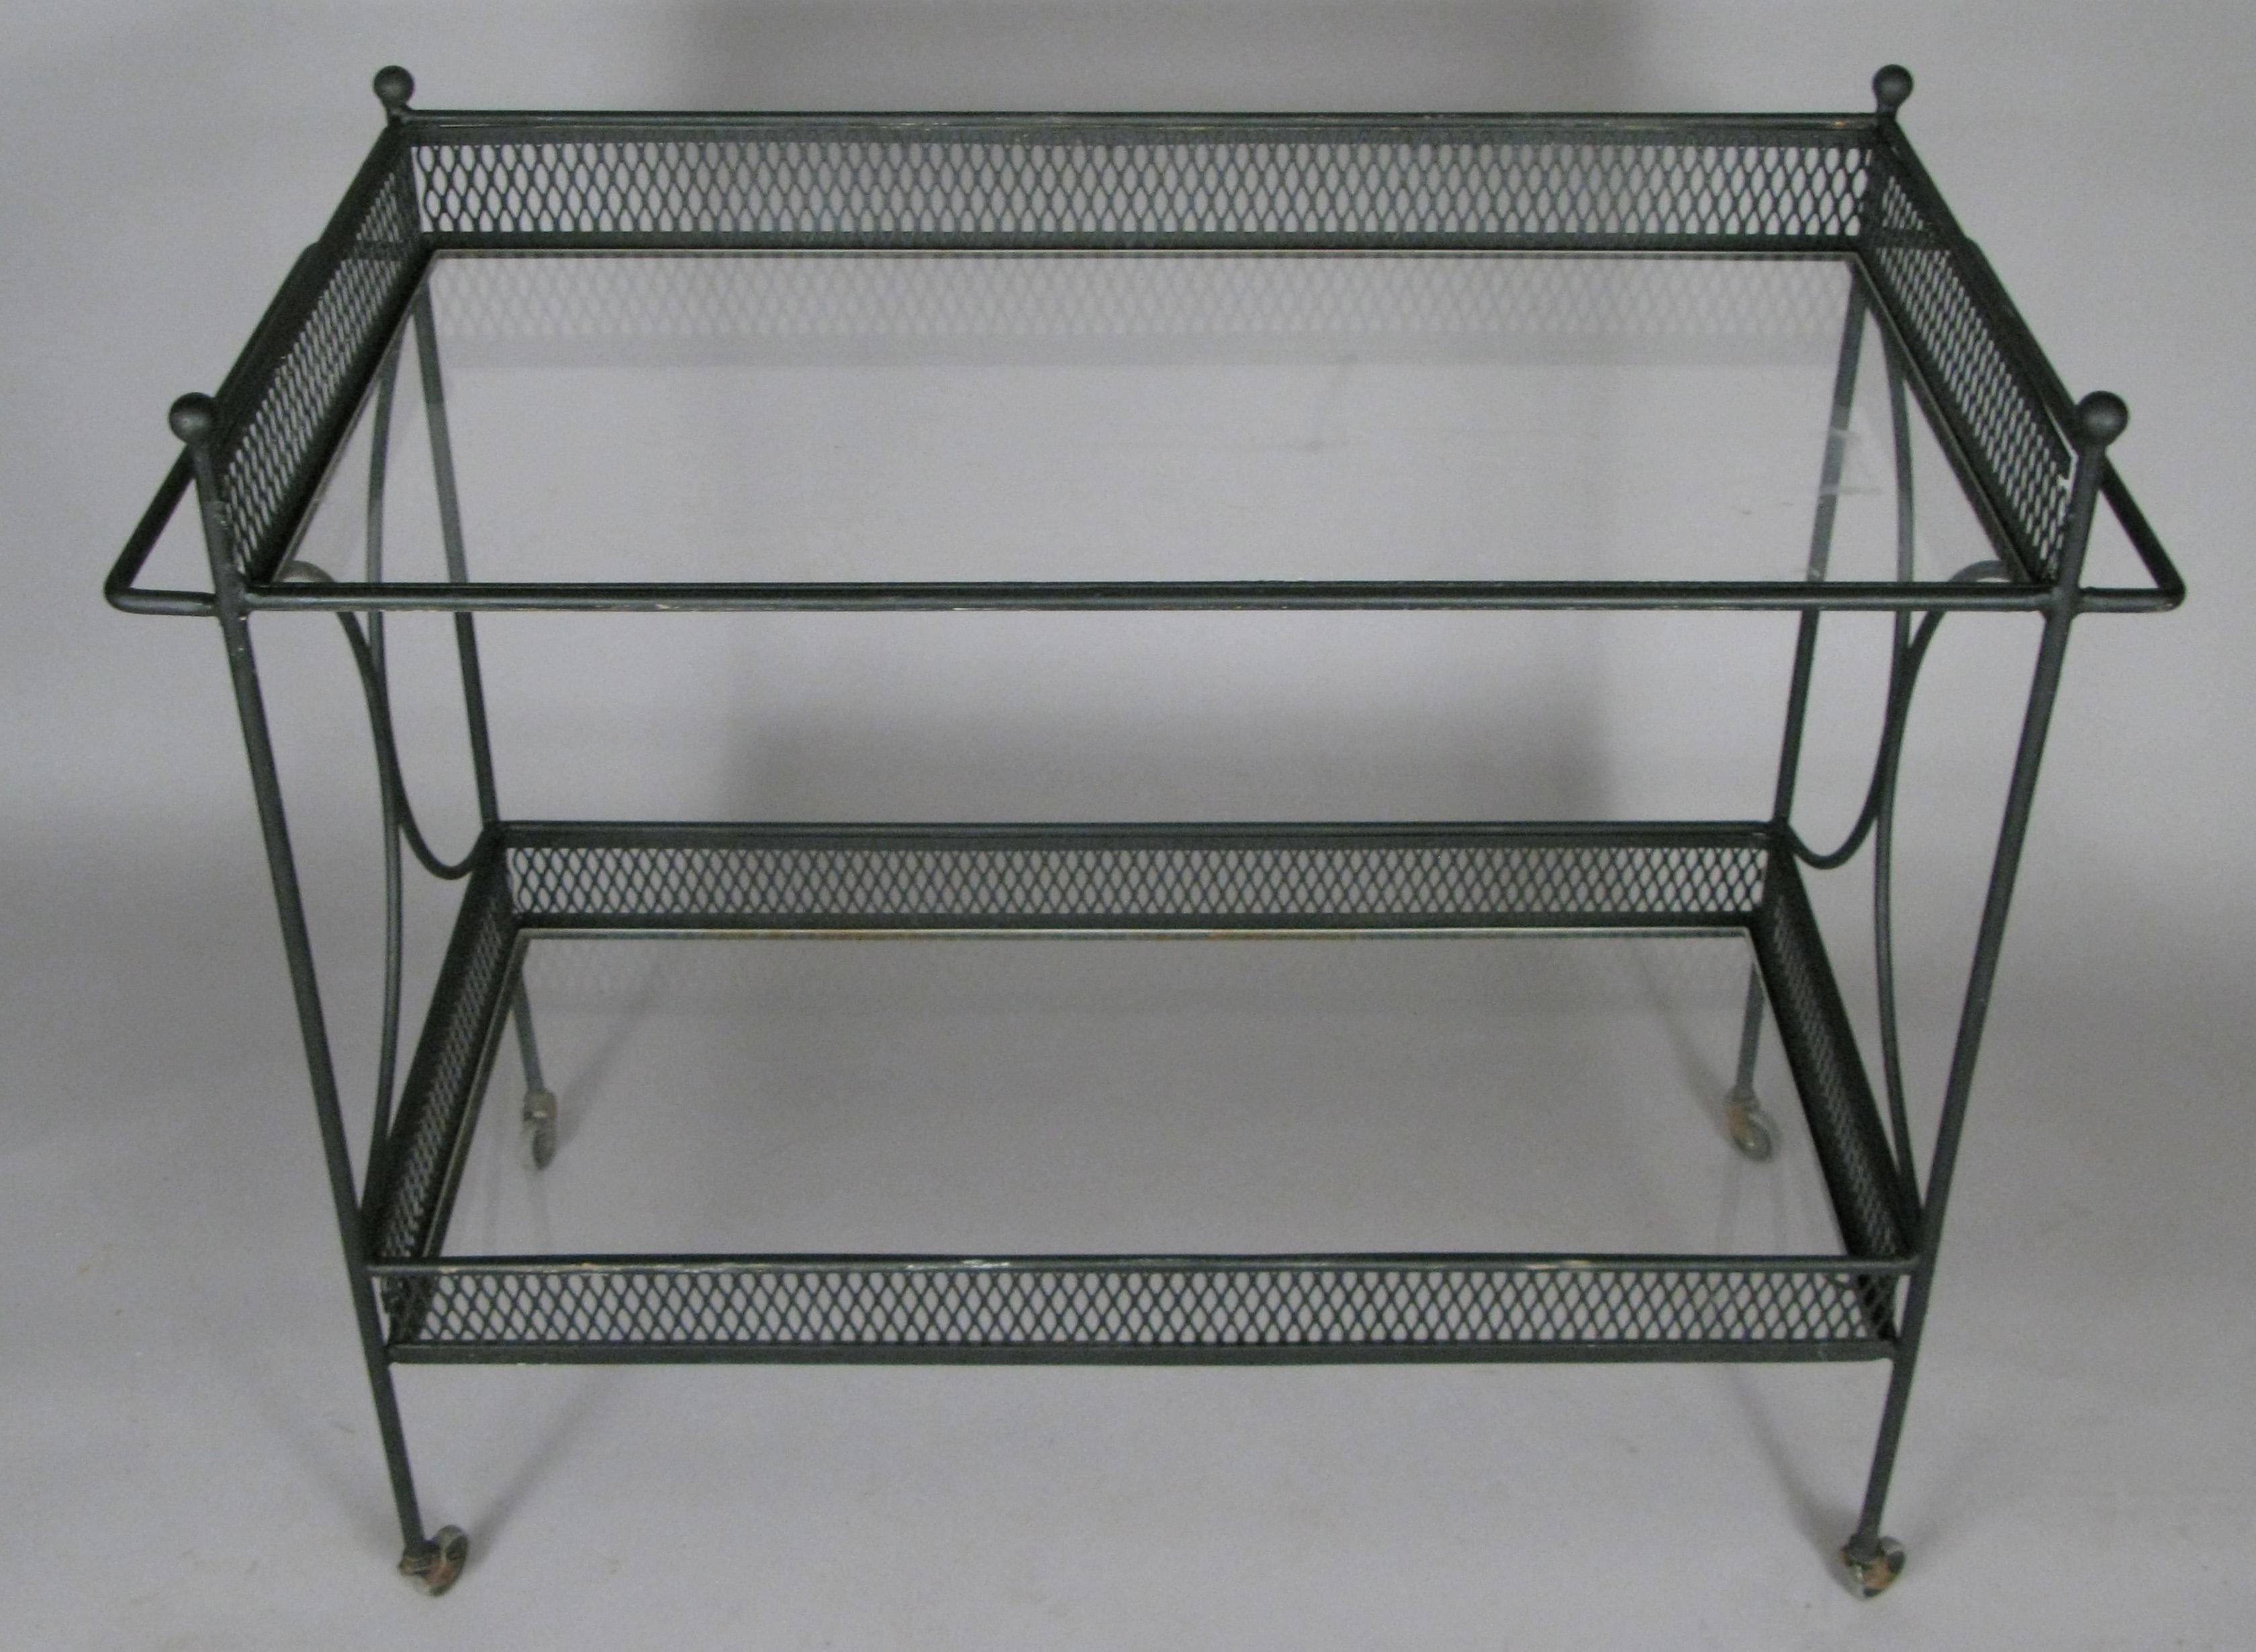 a classic modern wrought iron bar cart c. 1950 by Salterini. elegant large frame, with 2 full glass shelves, each with gallery rail. the sides have semi-circular design, and the corners have ball finials. 